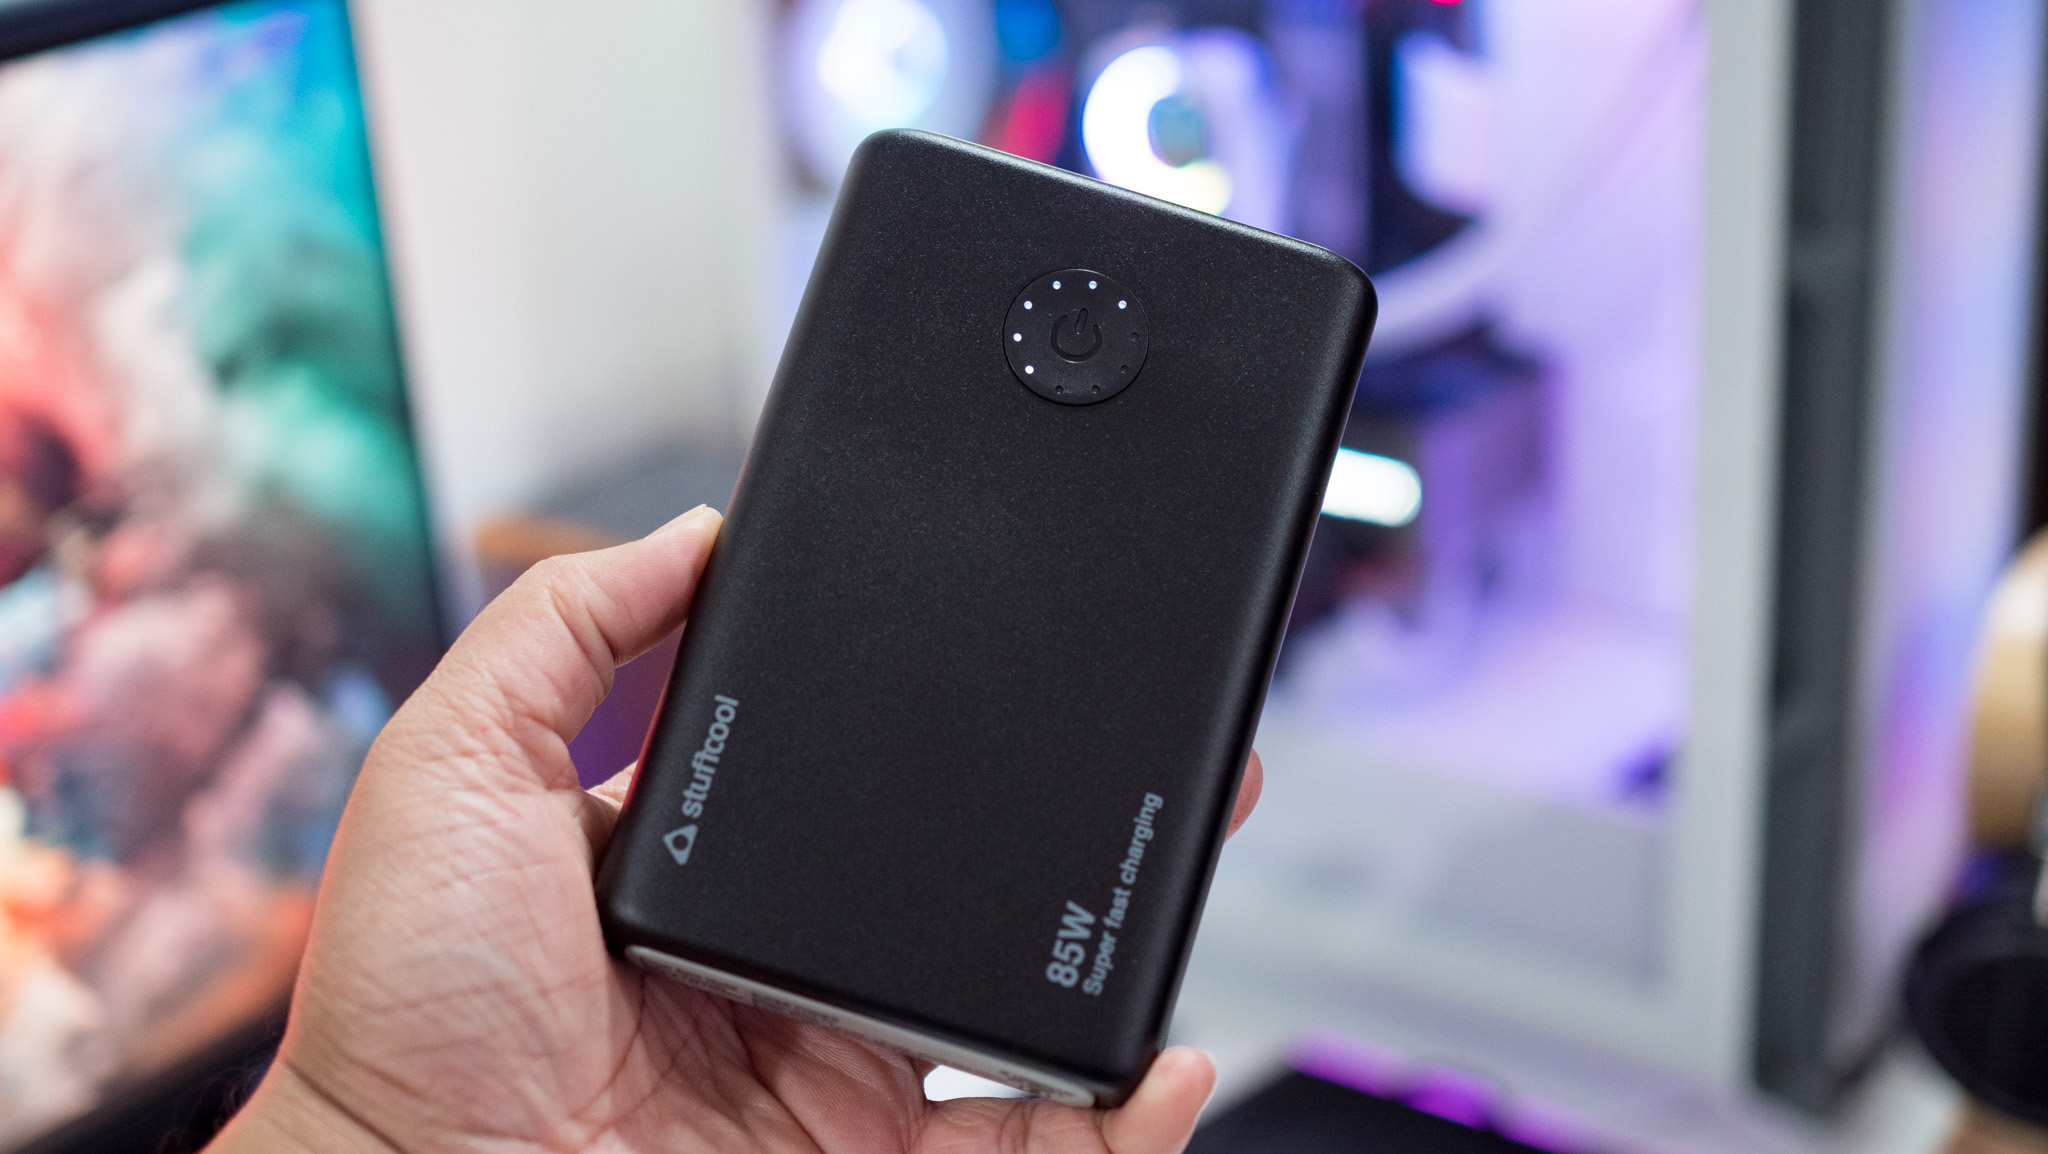 In-hand view of the Stuffcool 85W Power Bank